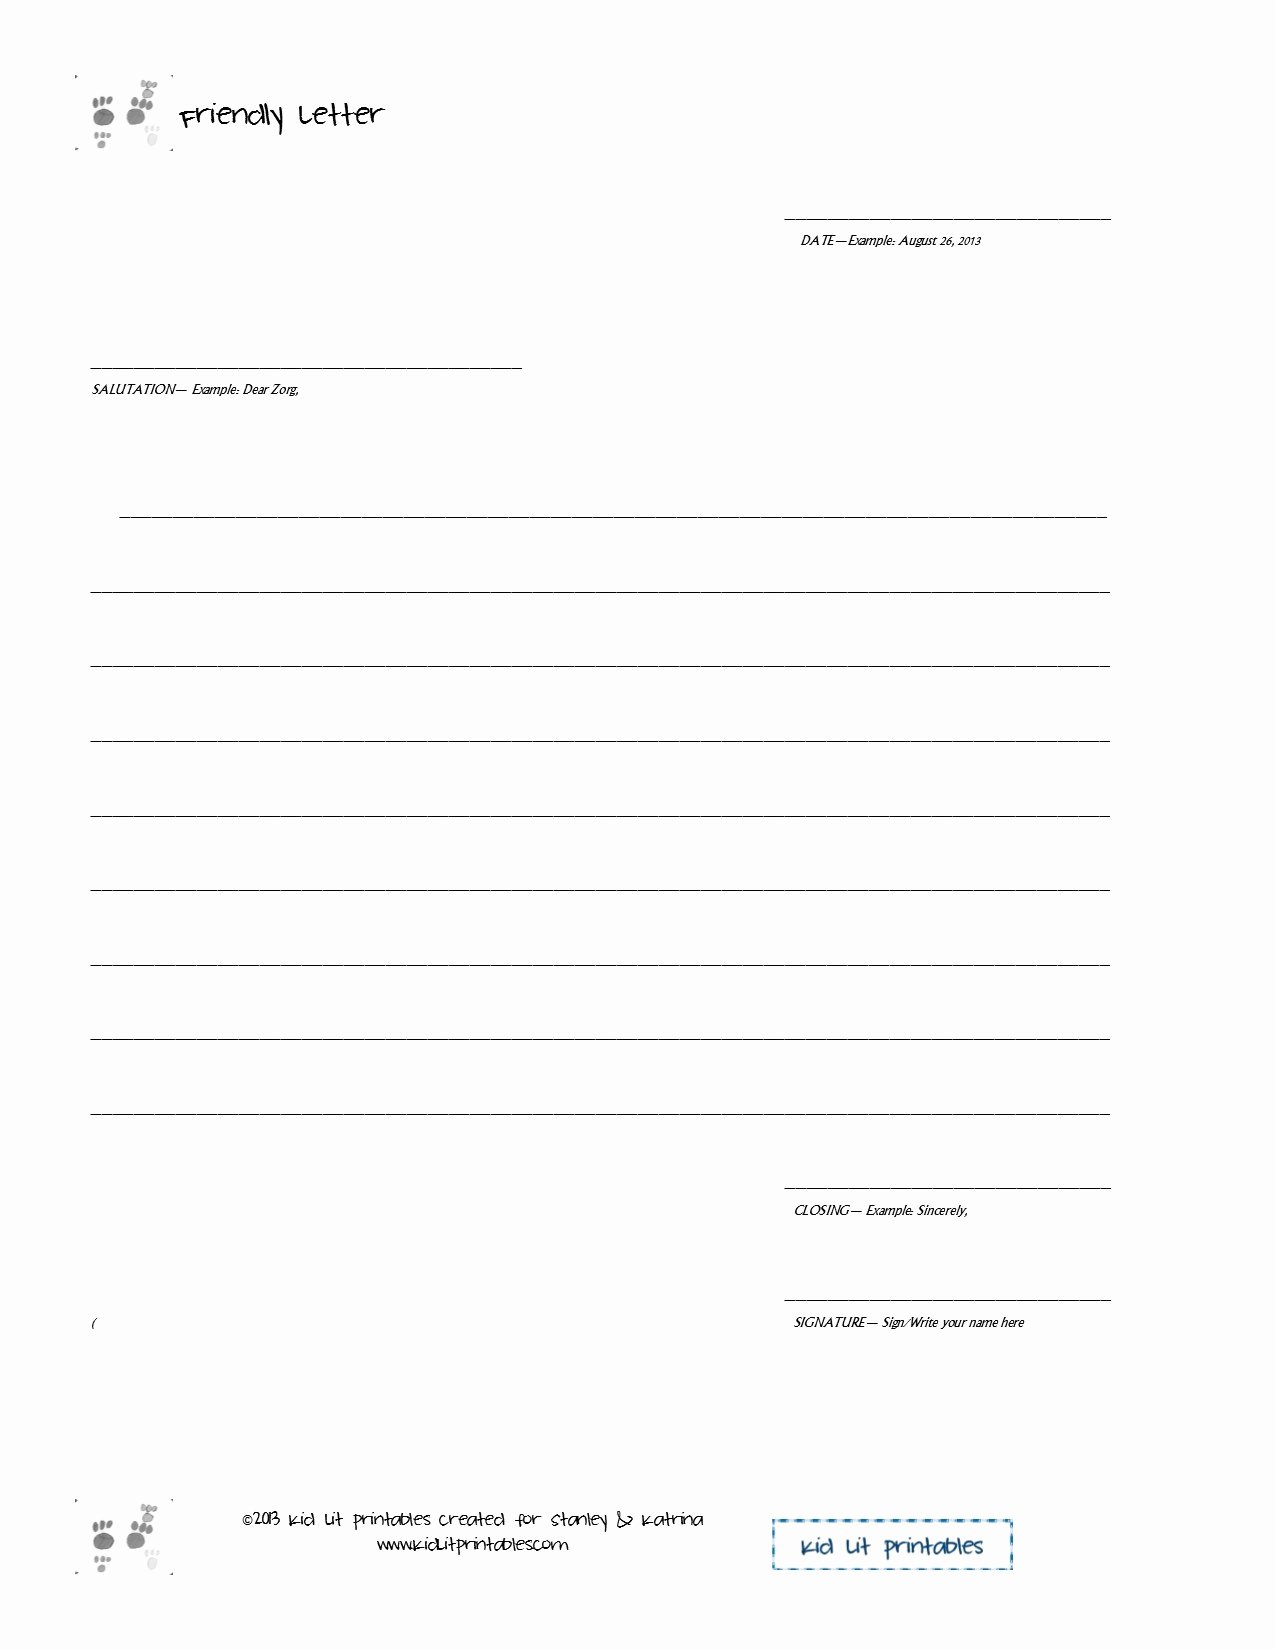 Personal Letter format Template Beautiful Personal Letter format for Kids